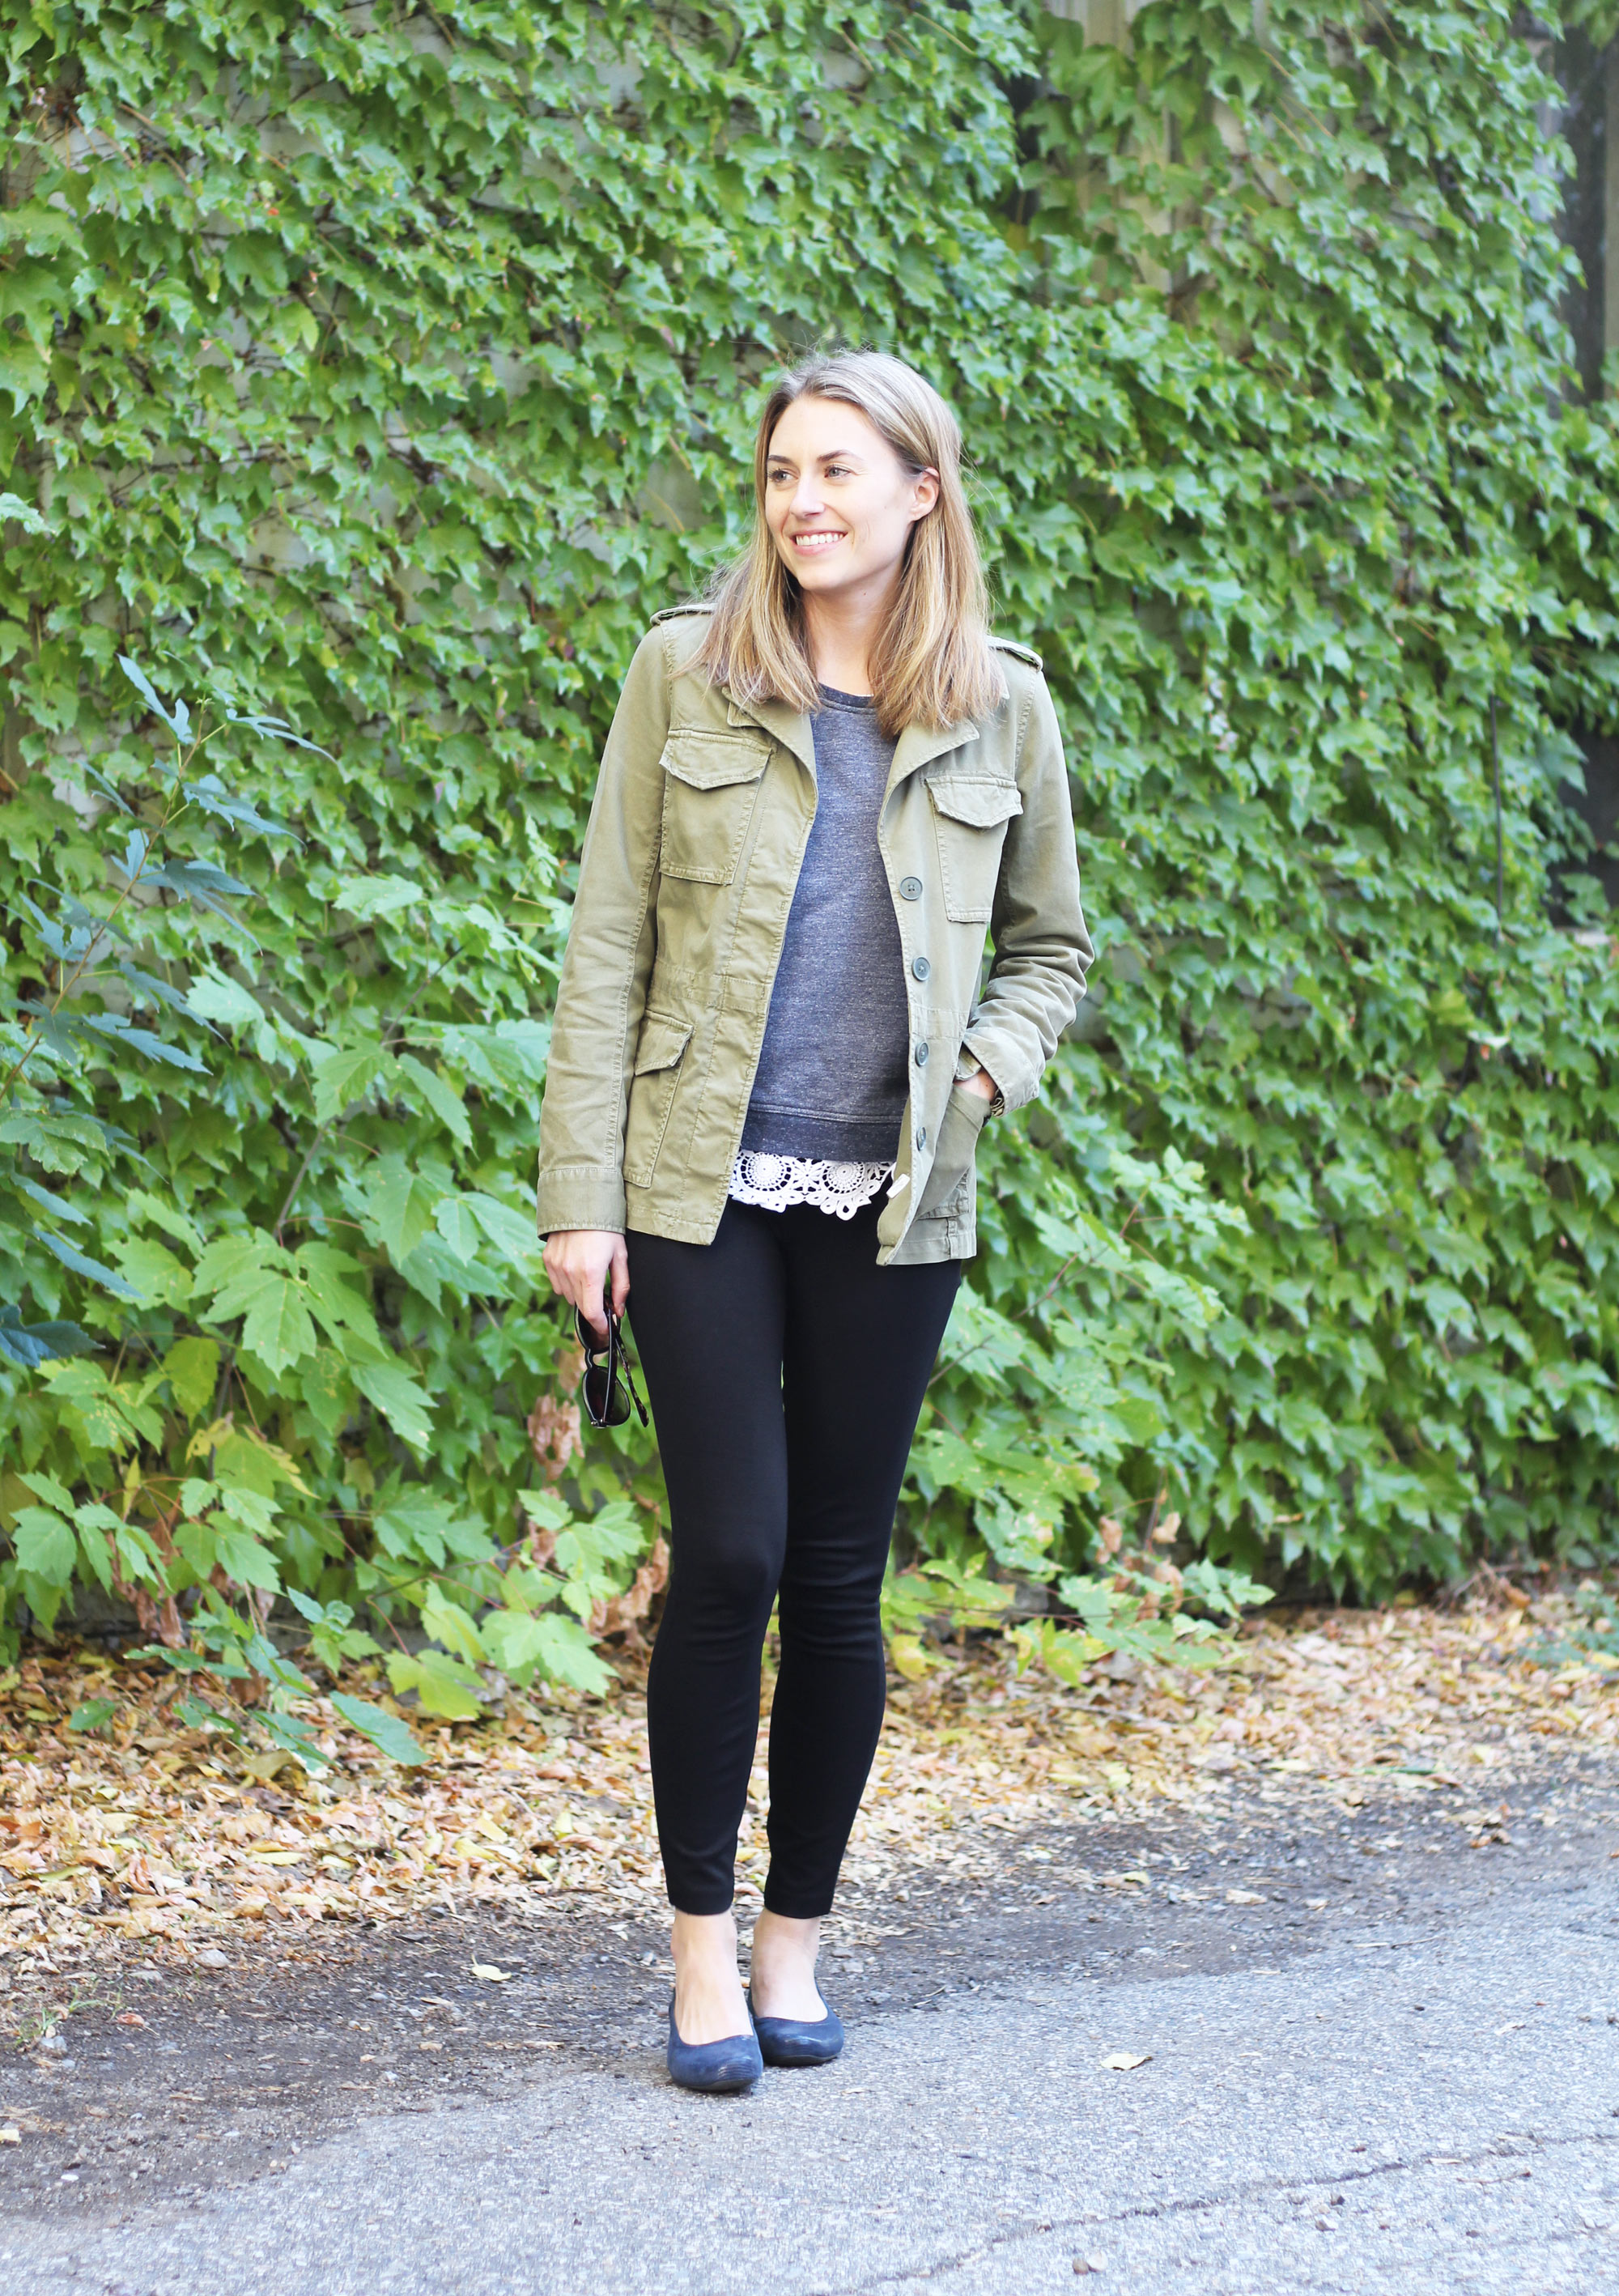 Fall is for layering